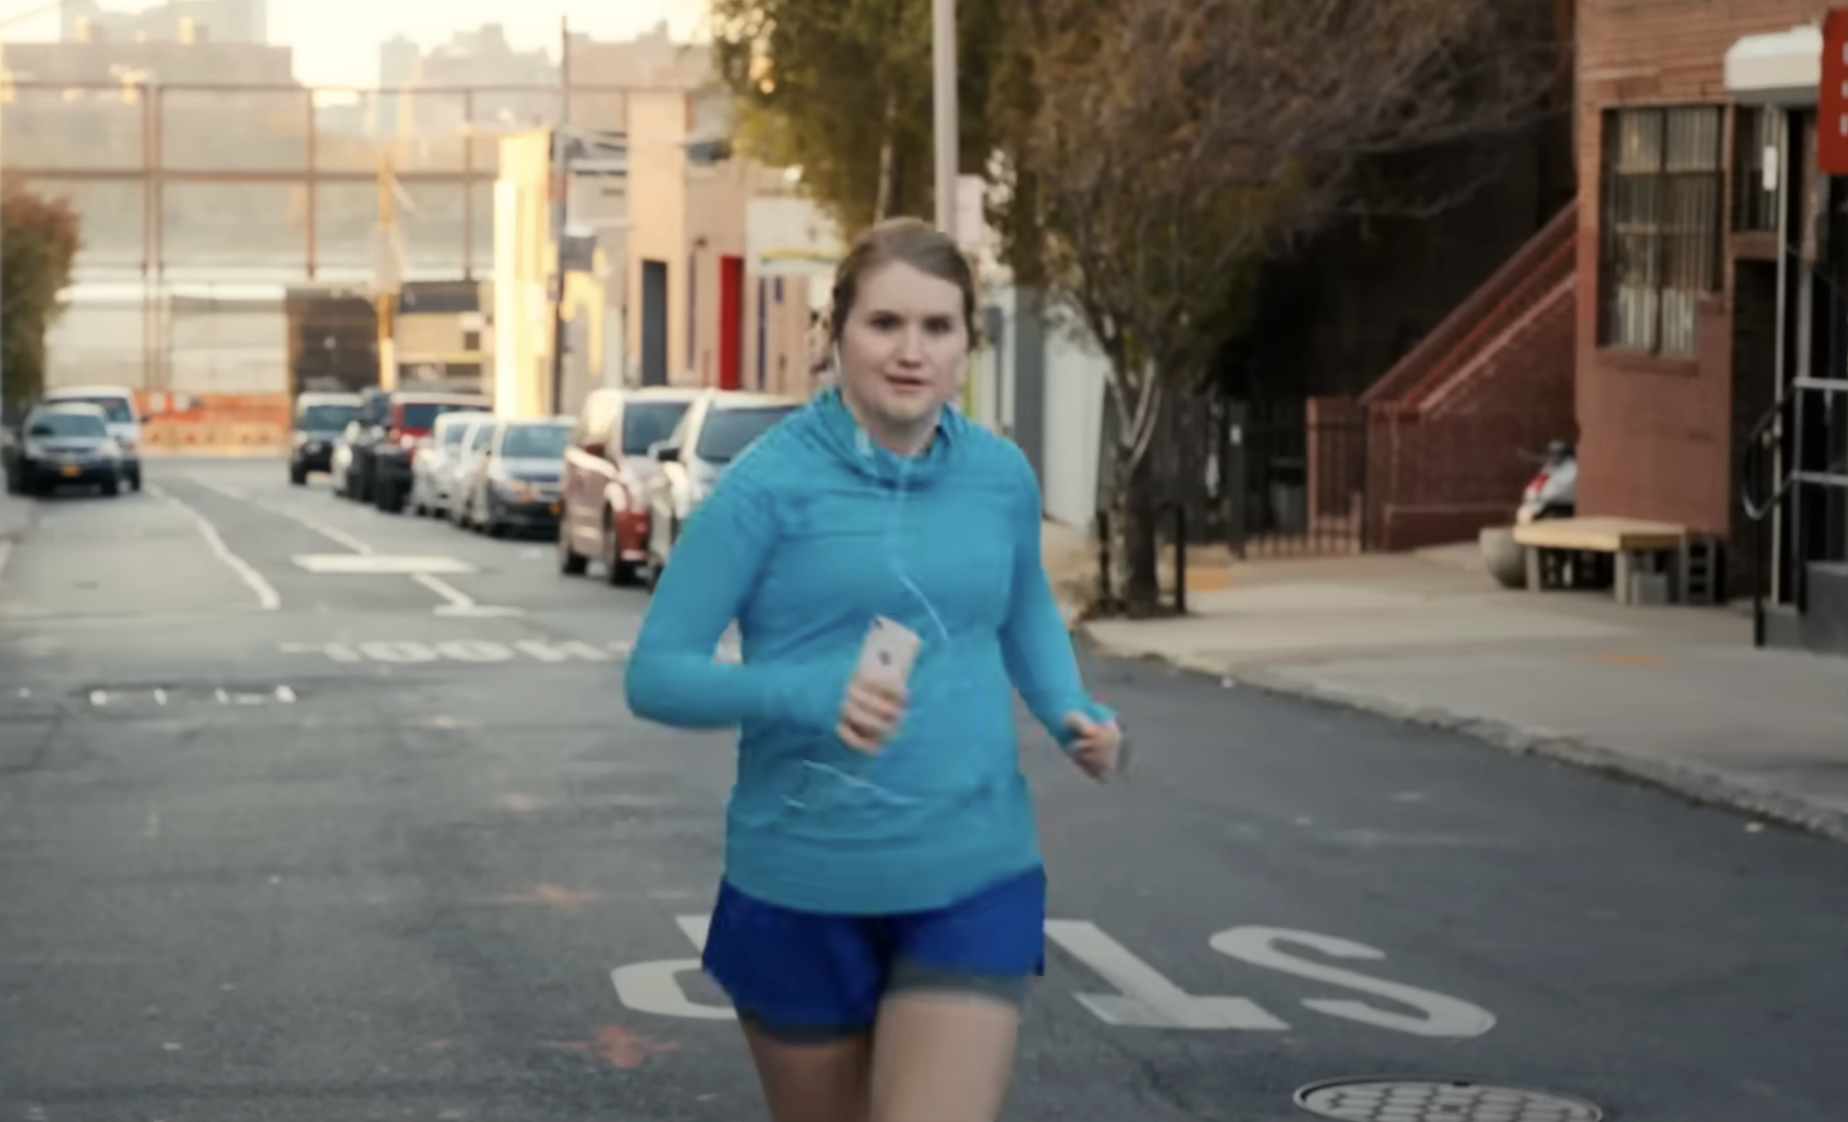 Woman jogging on a city street with headphones, in athletic wear